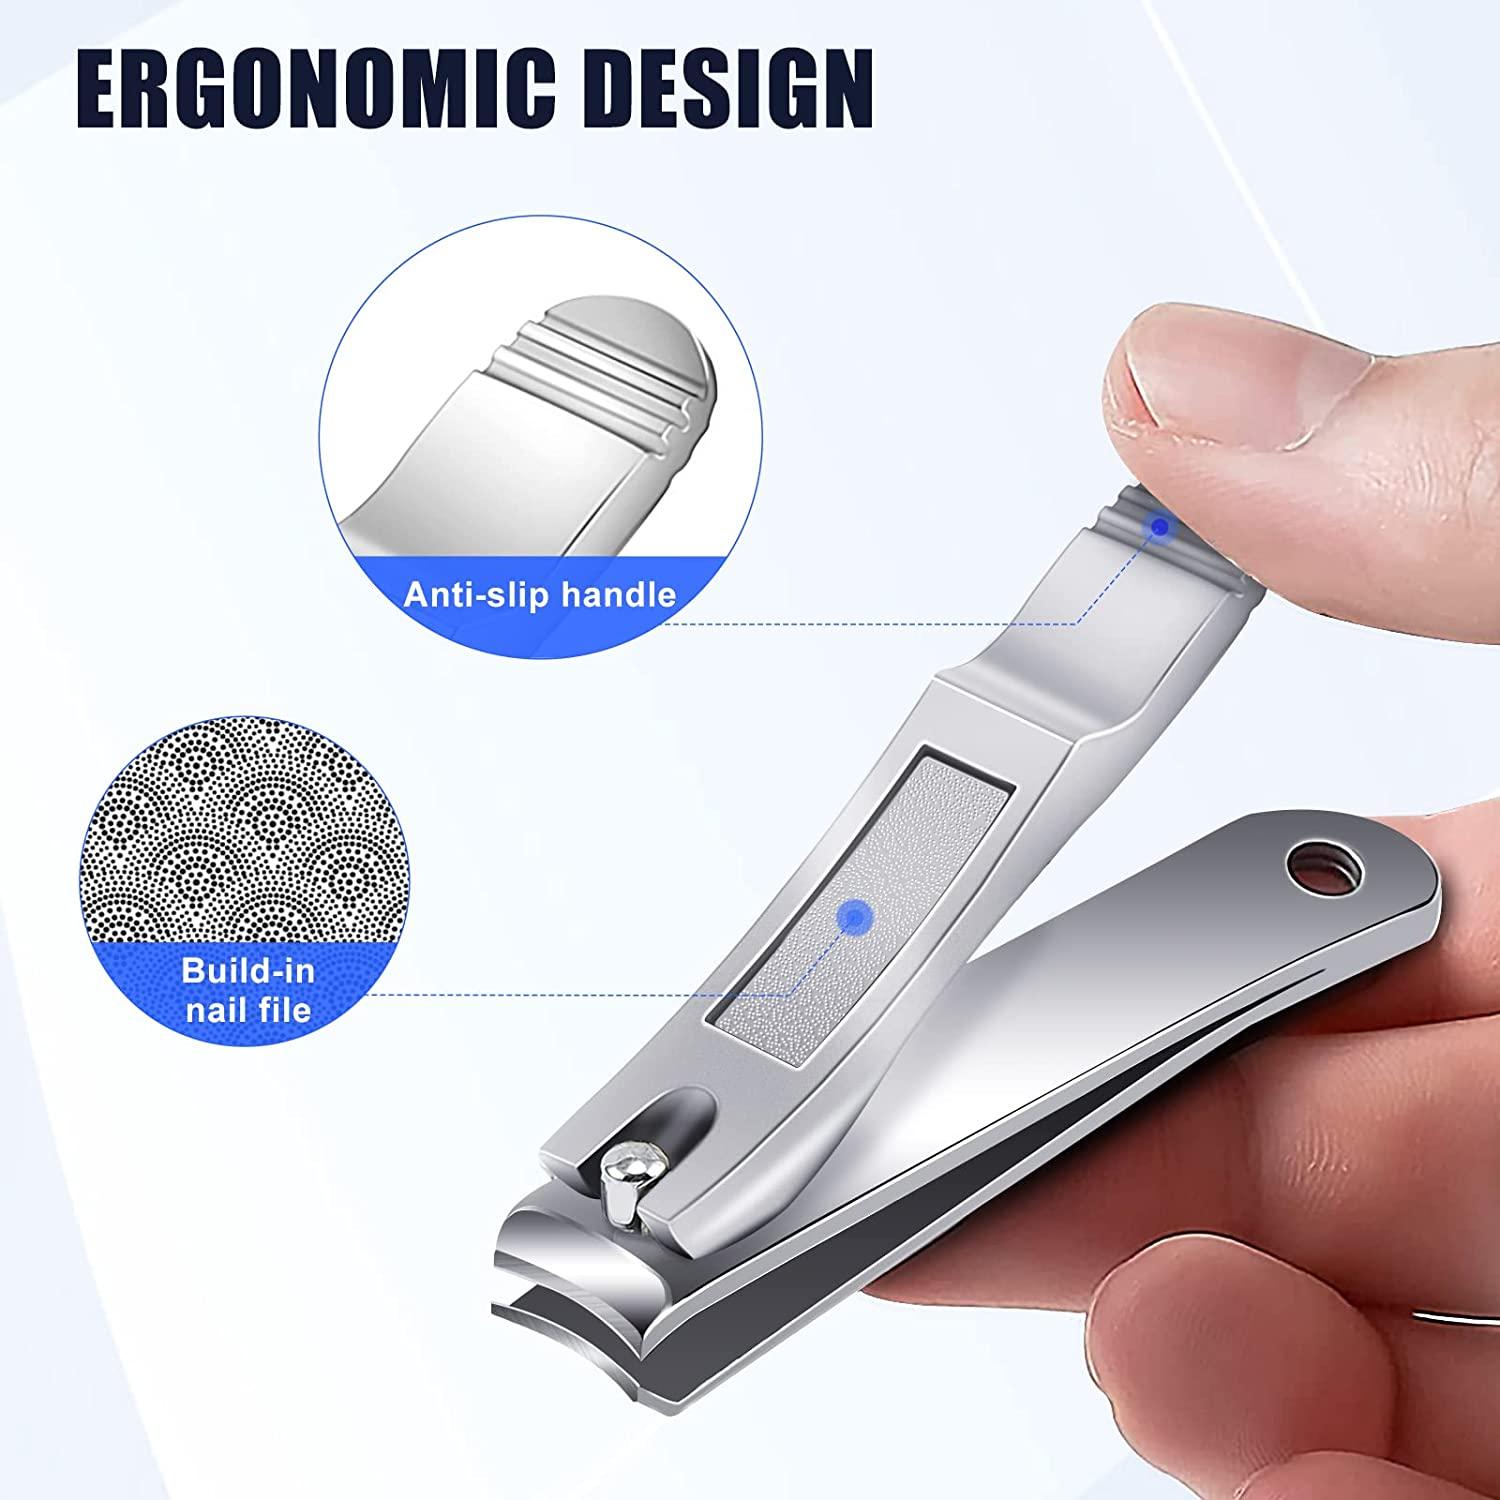 Amazon.com : PANA USA Luxury Small Fingernail Clipper, Sharpest and  Stainless Steel Nail Cutter Trimmer (Manicure Pedicure) : Beauty & Personal  Care